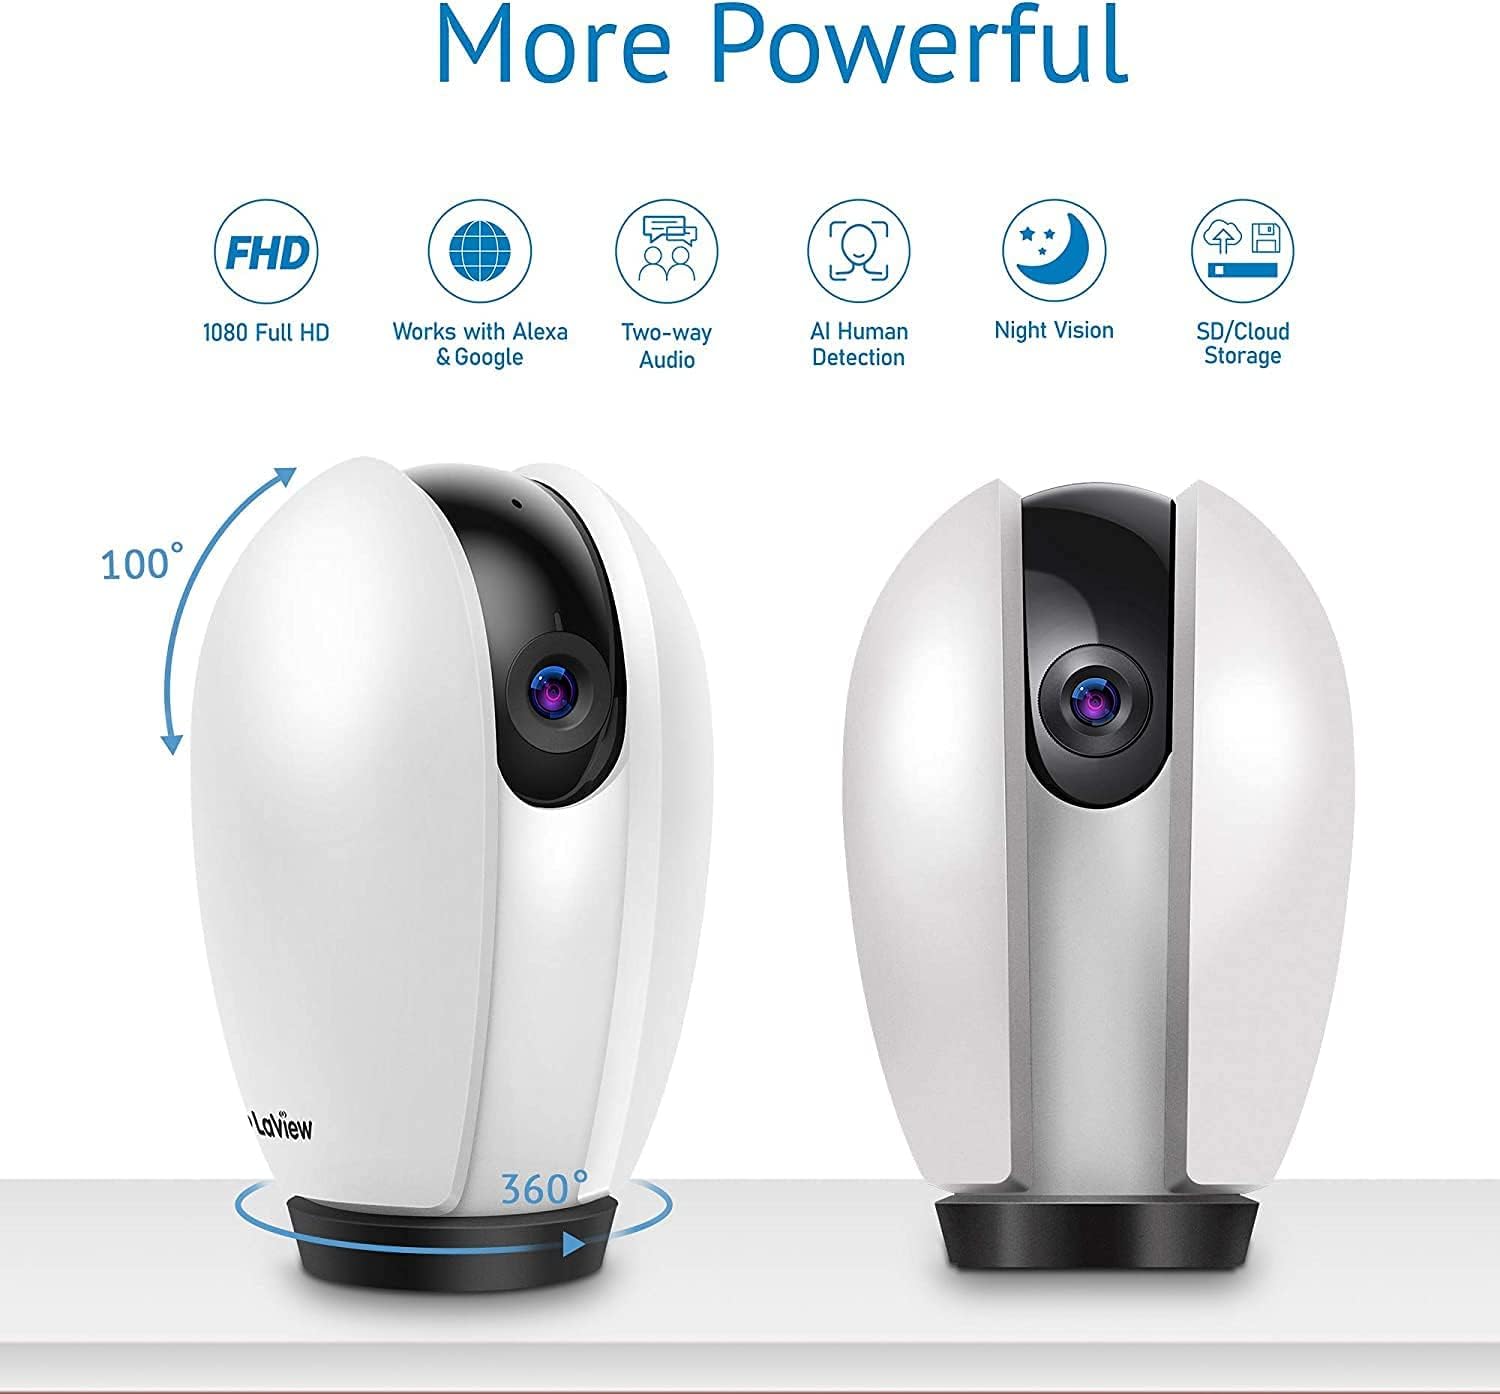 LaView R3 WiFi Pan-Tilt Security Camera - Give You the Safest Home